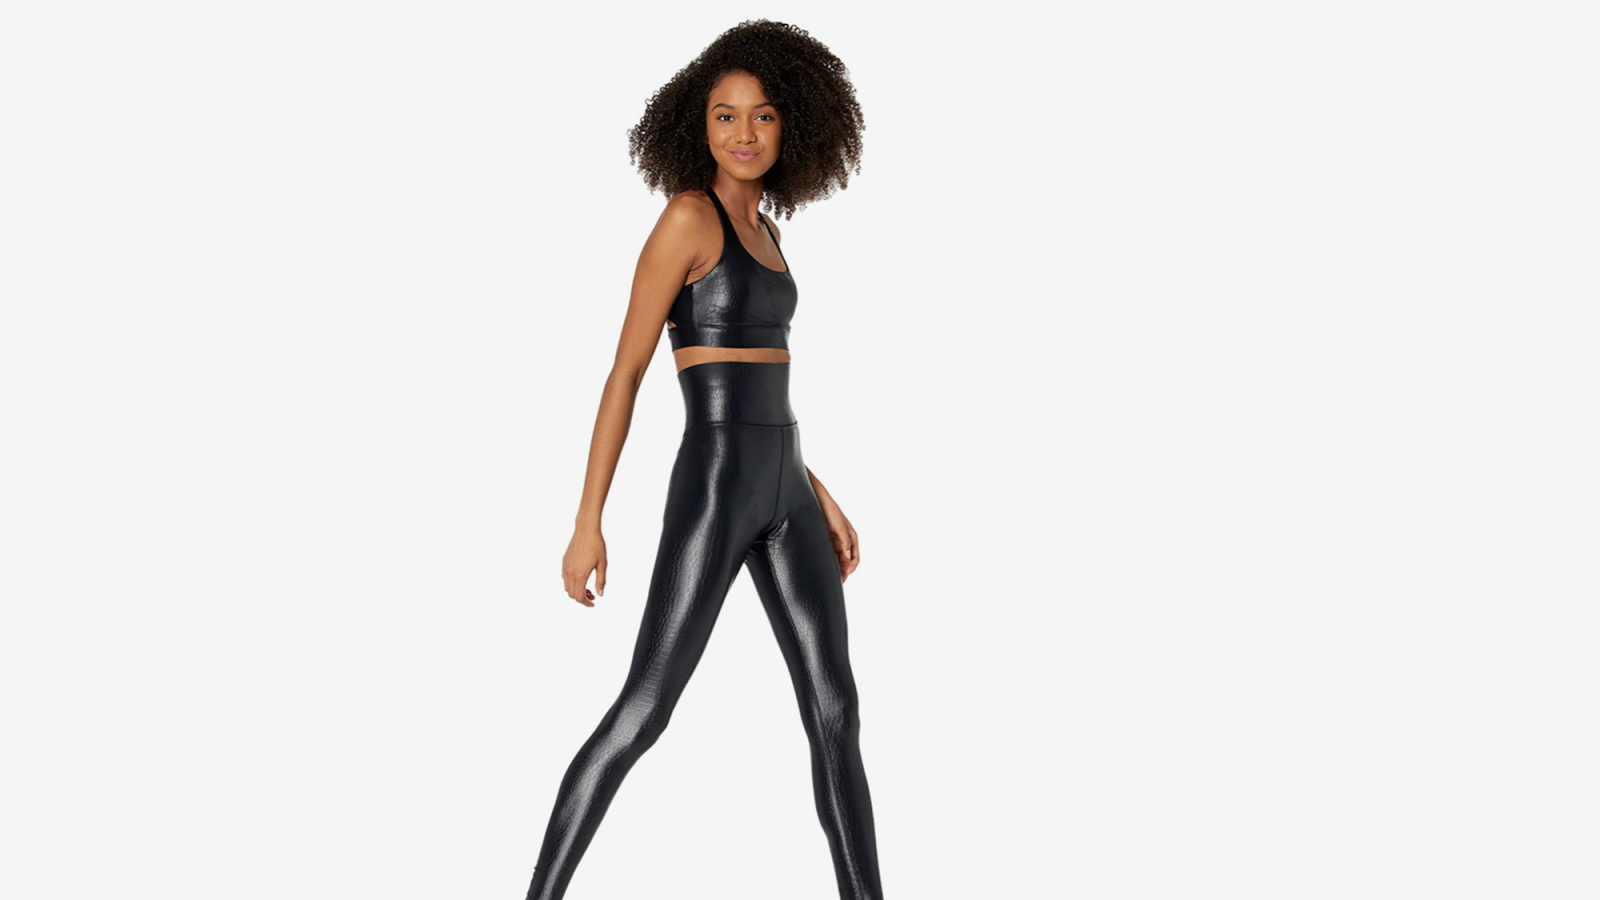 Rock These Carbon38 Faux-Leather Leggings From Barre to the Bar